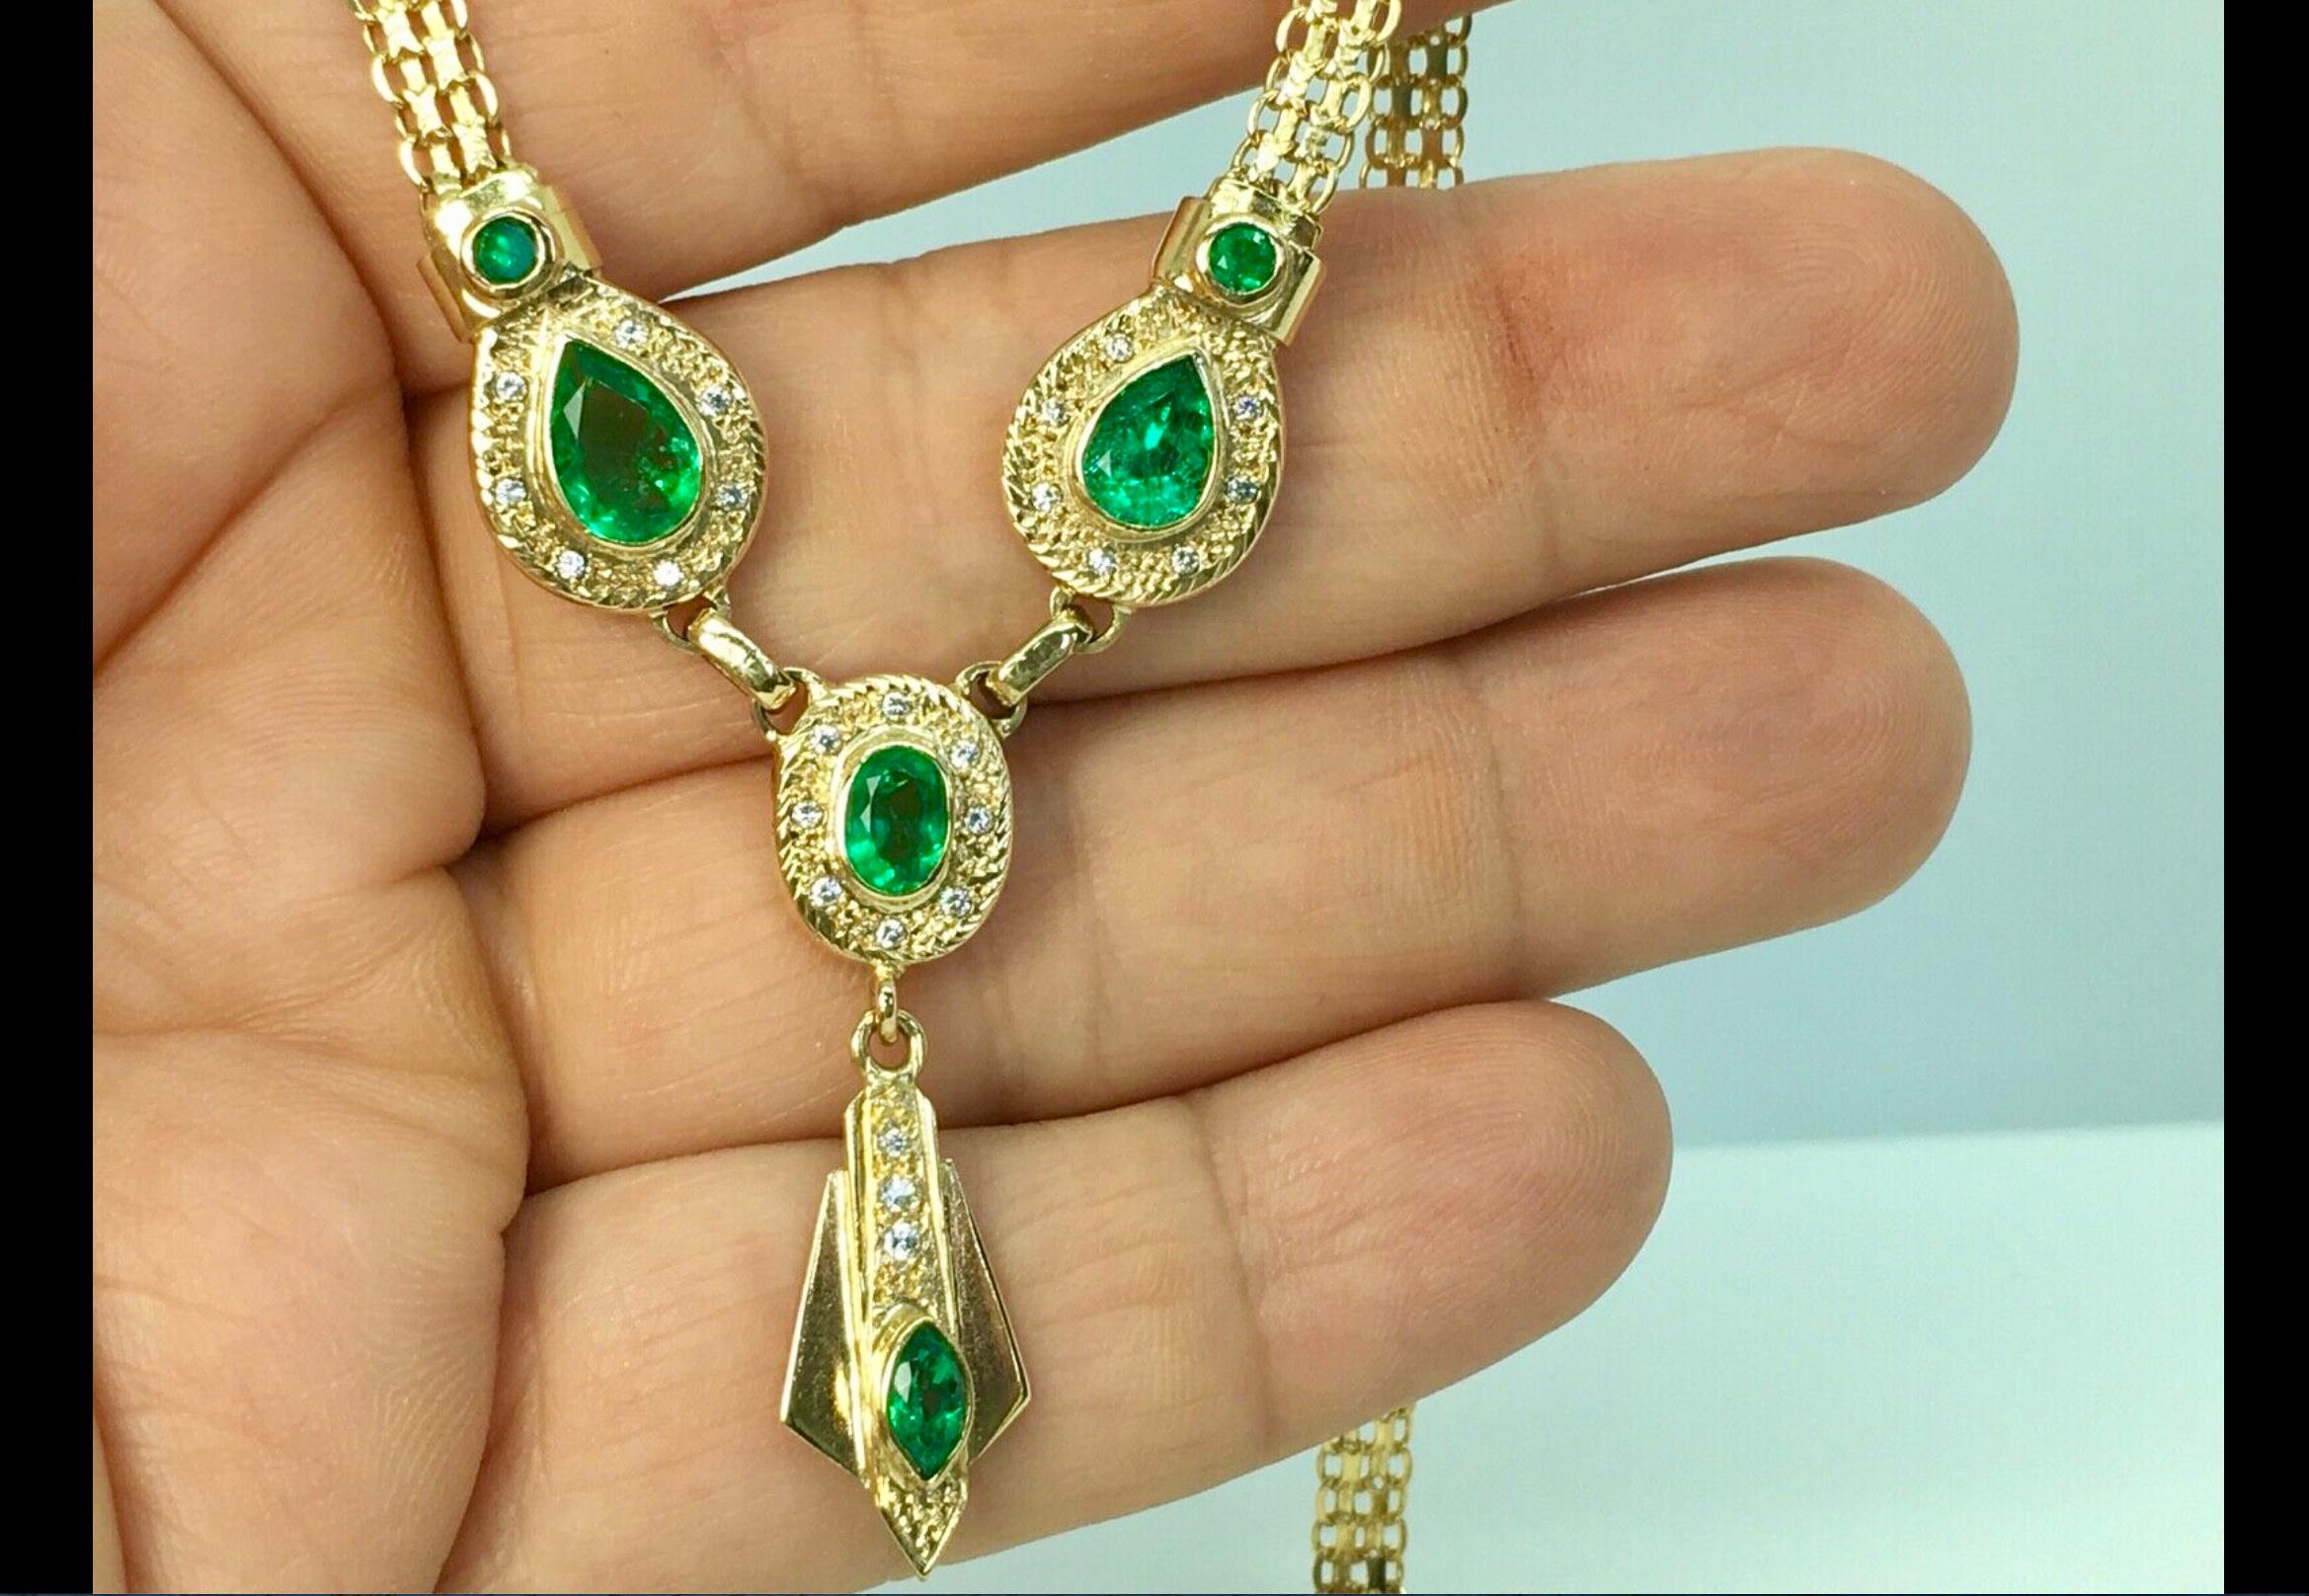 Fine Quality Colombian Emeralds 100% Natural. This Incredible Emerald  Necklace is a custom made of solid 18k Yellow Gold. Feature 6 Natural Colombian Emerald, The fines quality in color (Intense medium Green). Top Quality Colombian Emeralds Weight